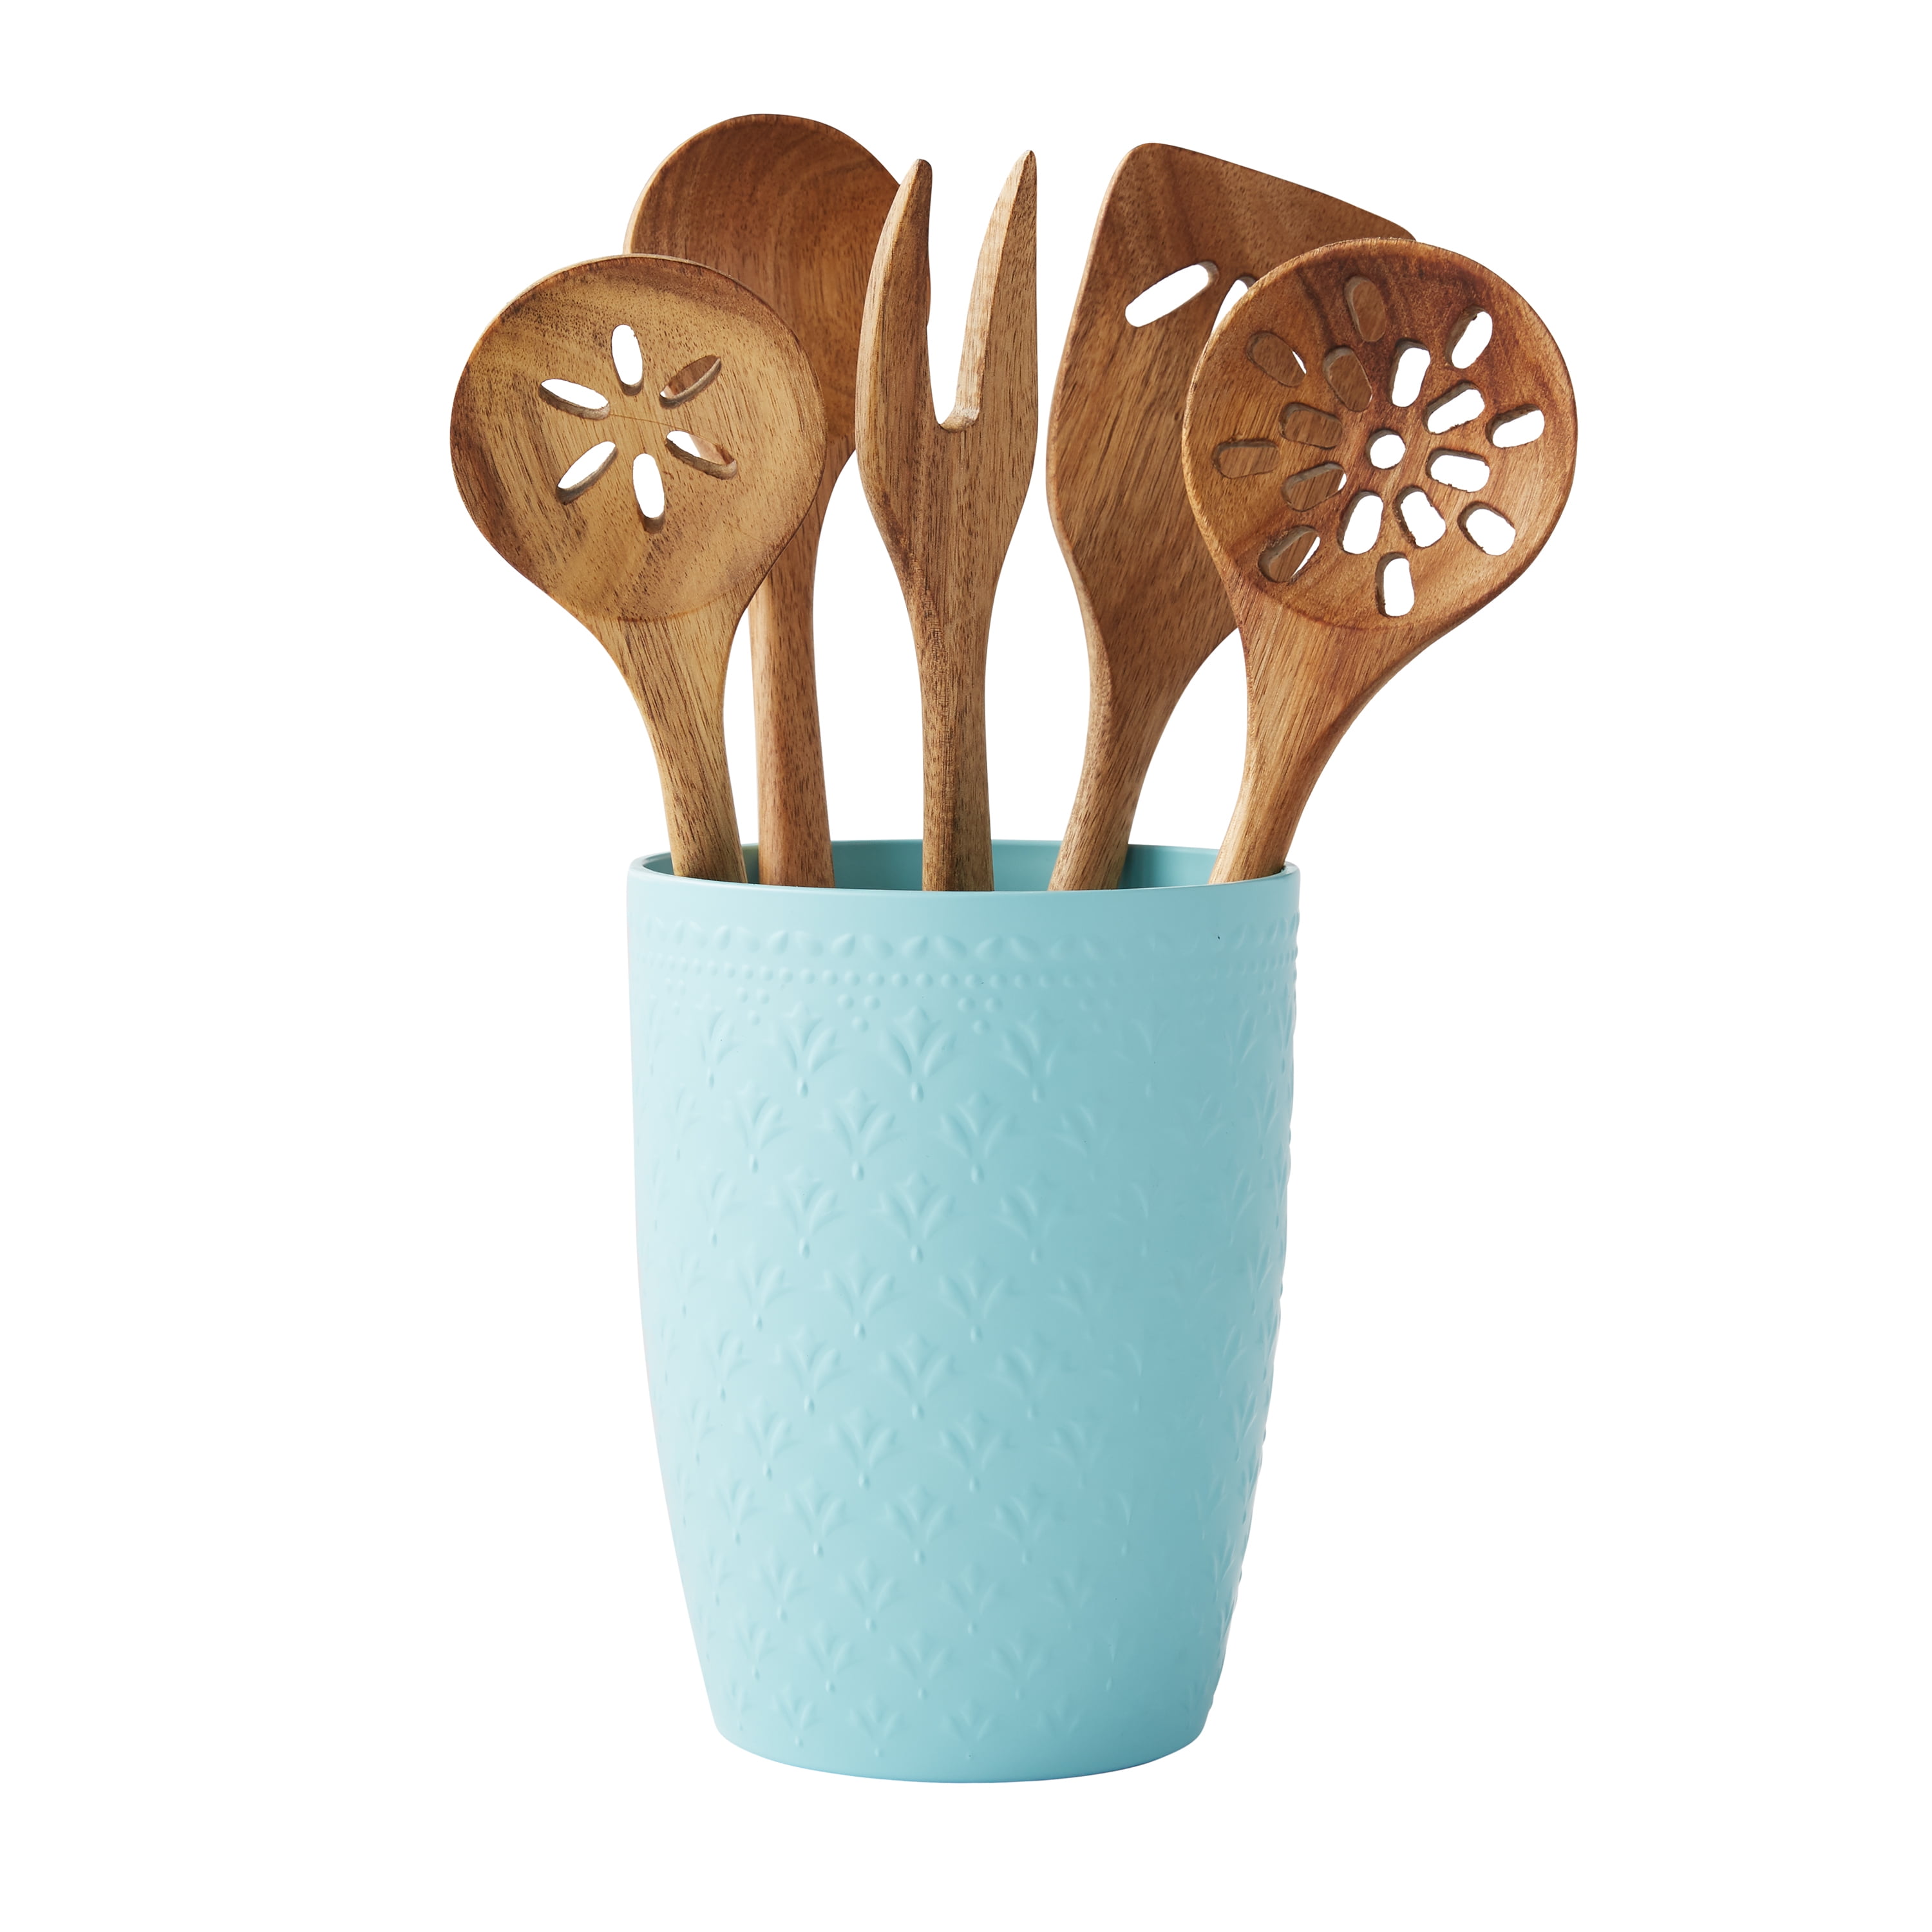 The Pioneer Woman Patchwork Medley 6-Piece Acacia Wood Utensil Set